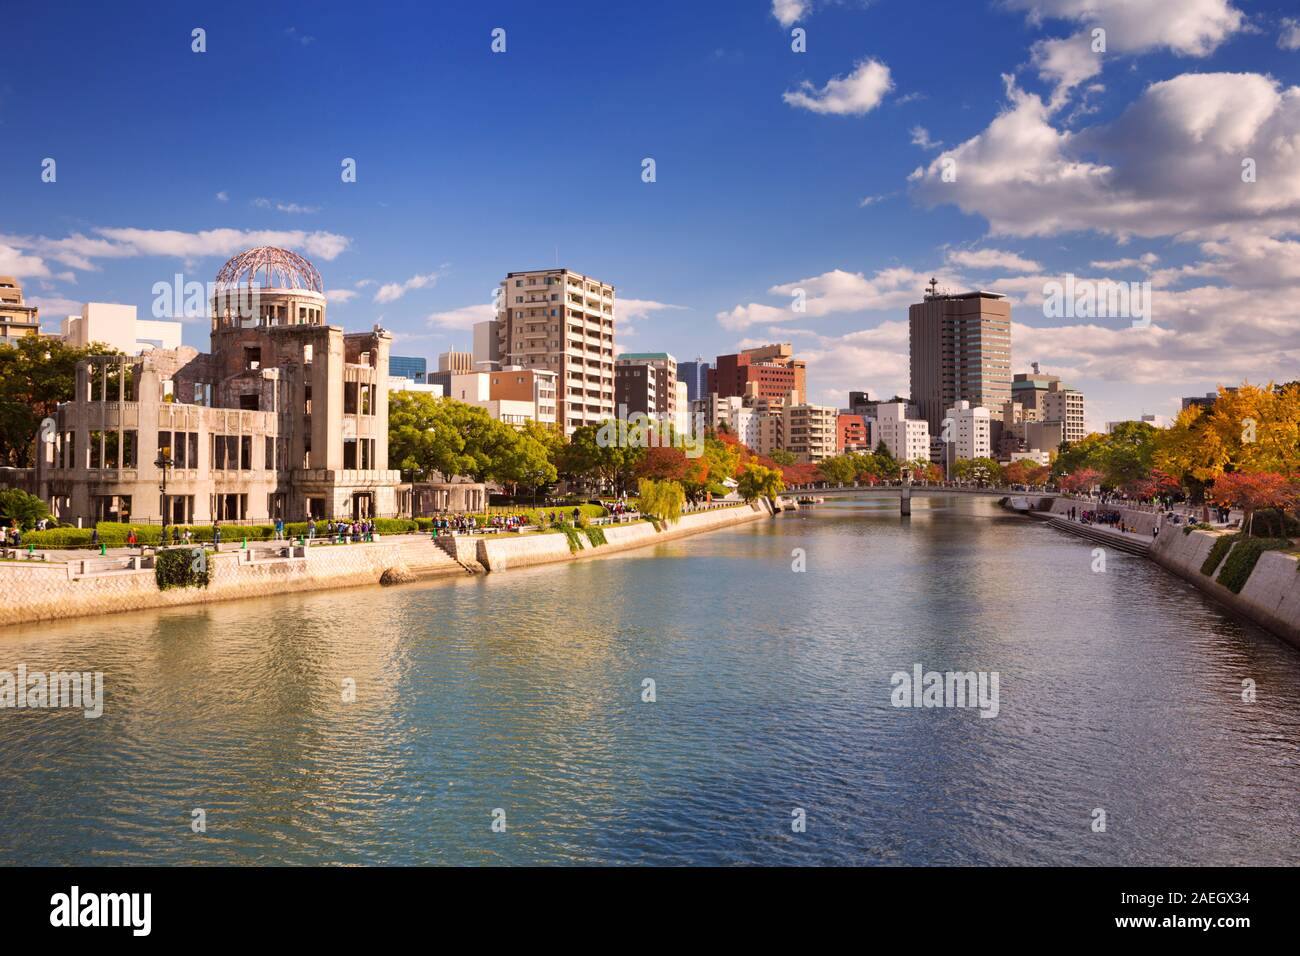 The Atomic Bomb Dome (原爆ドーム) on the left and the Peace Memorial Park on the right along the river in Hiroshima on a sunny afternoon in autumn. Stock Photo